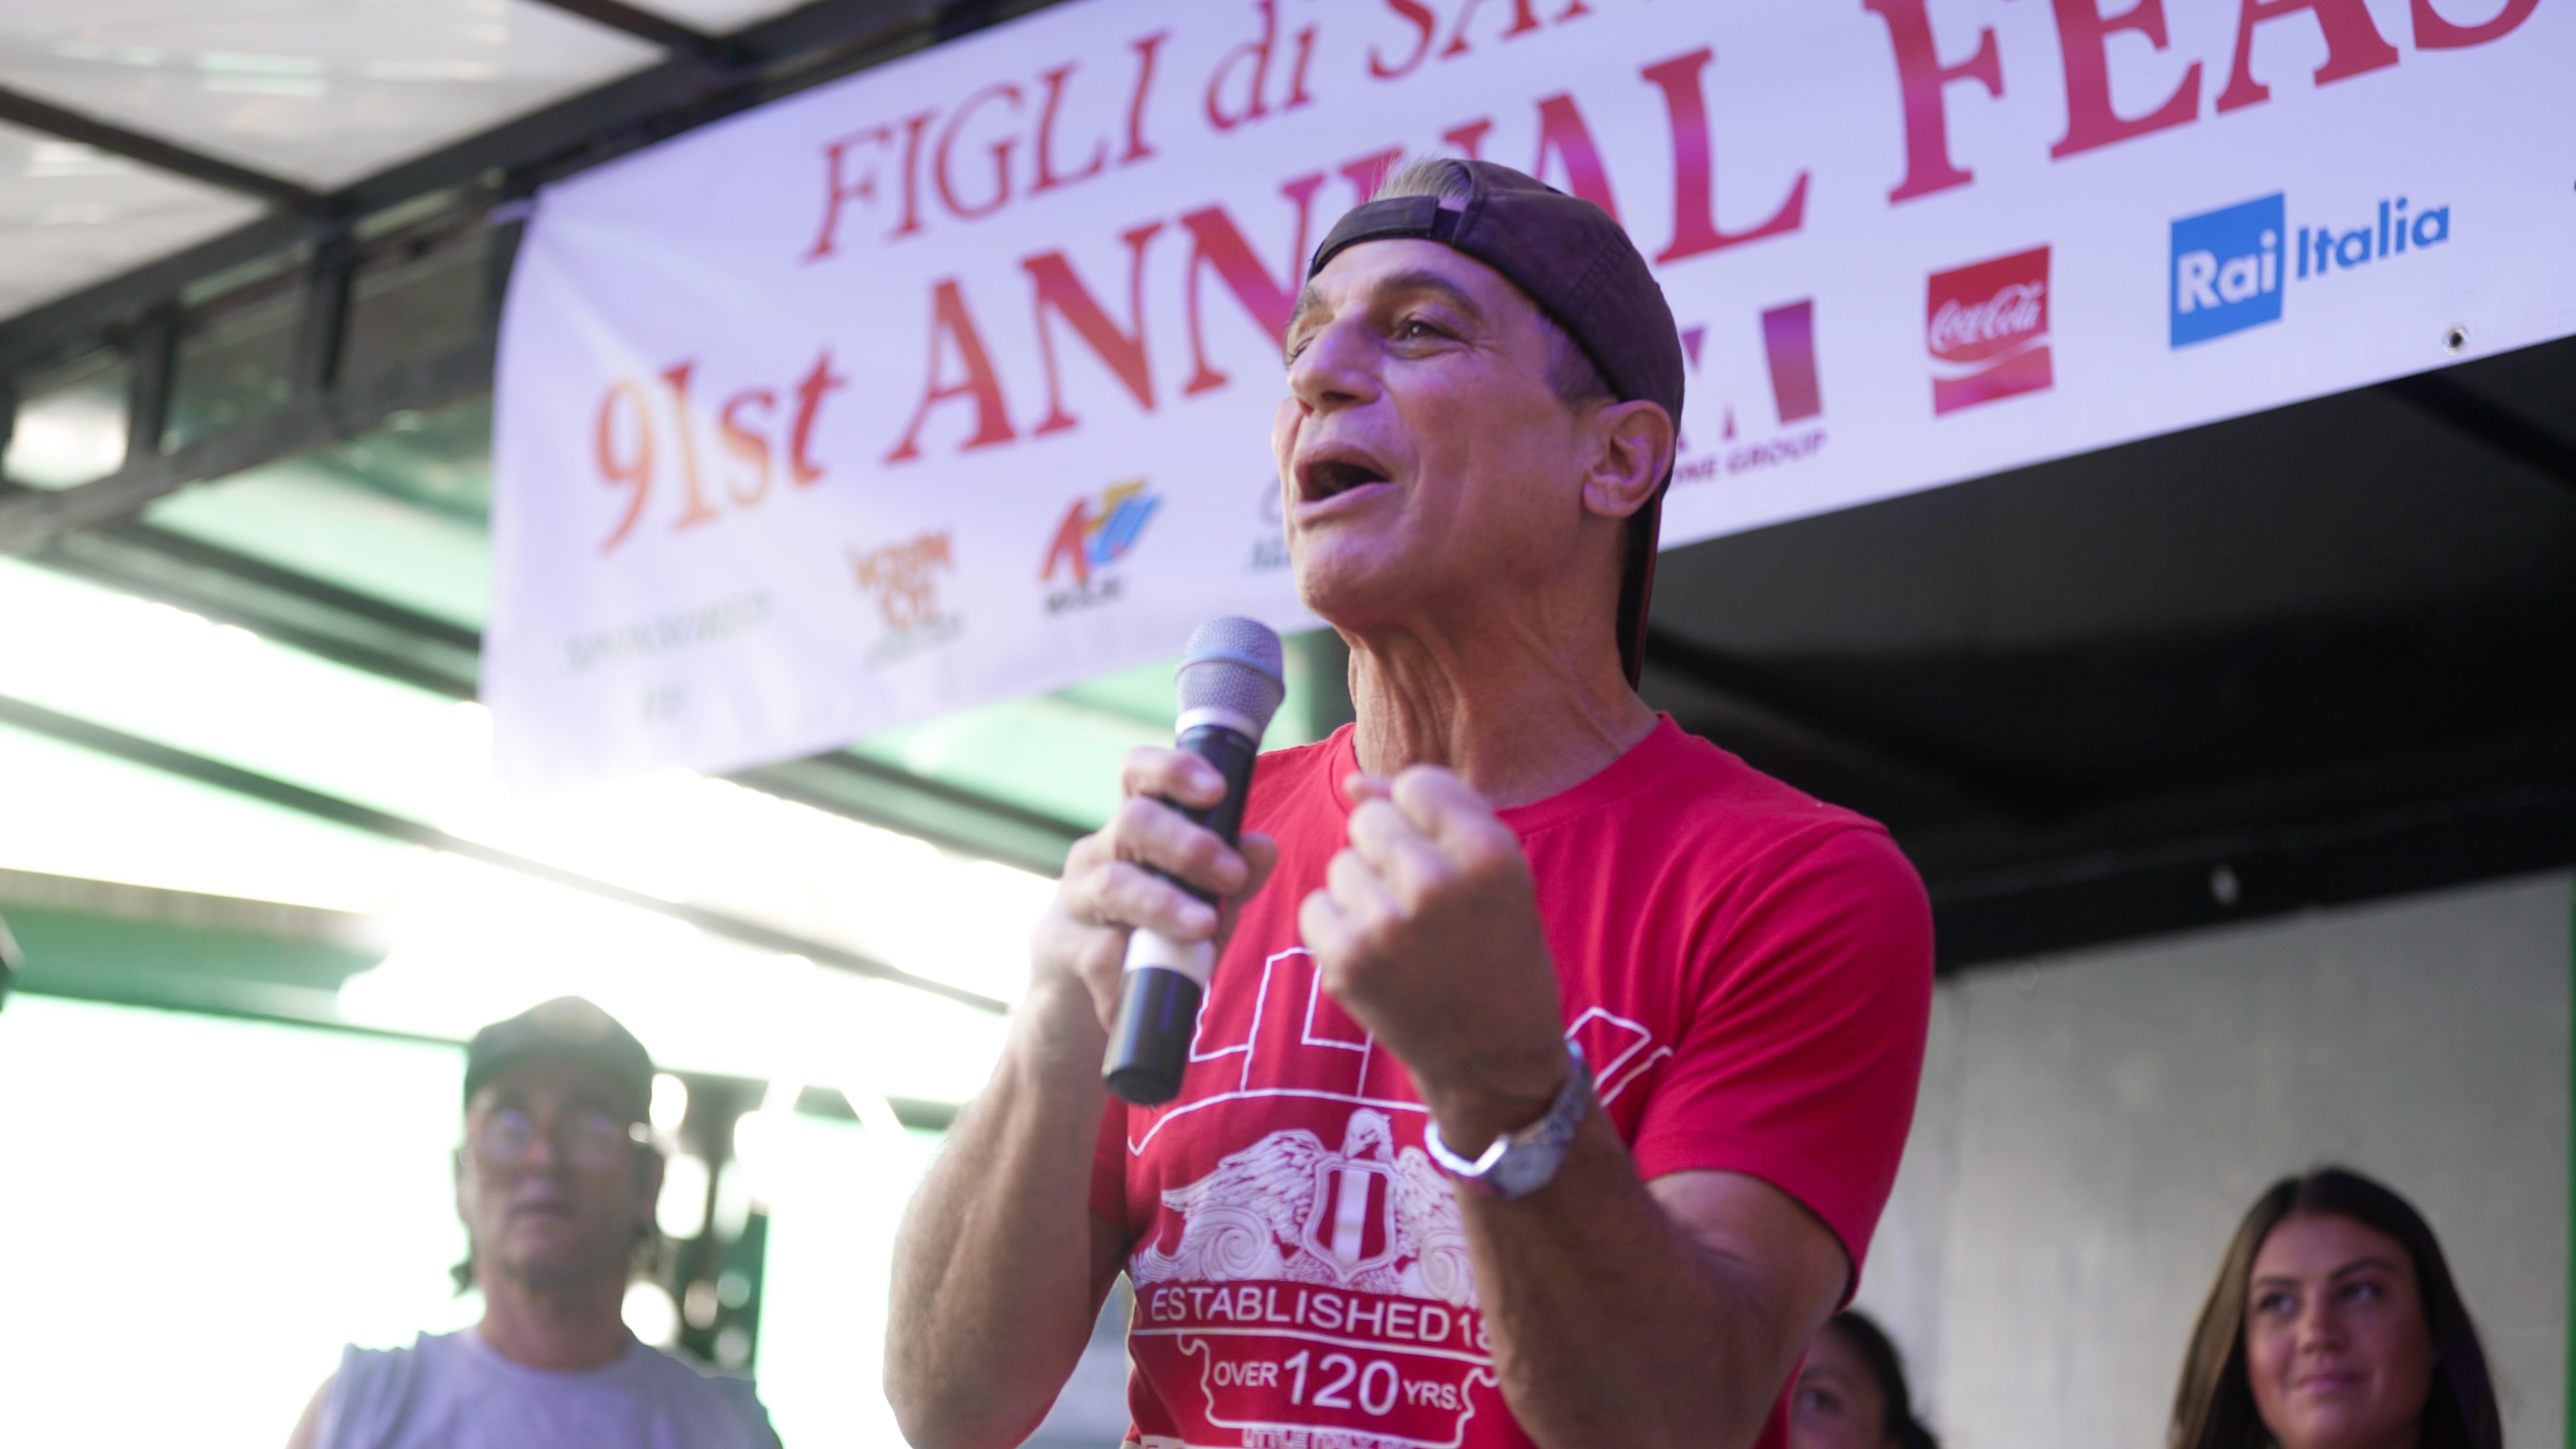 Tony Danza greeting the audience at the 2nd Annual San Gennaro Meatball Eating Competition